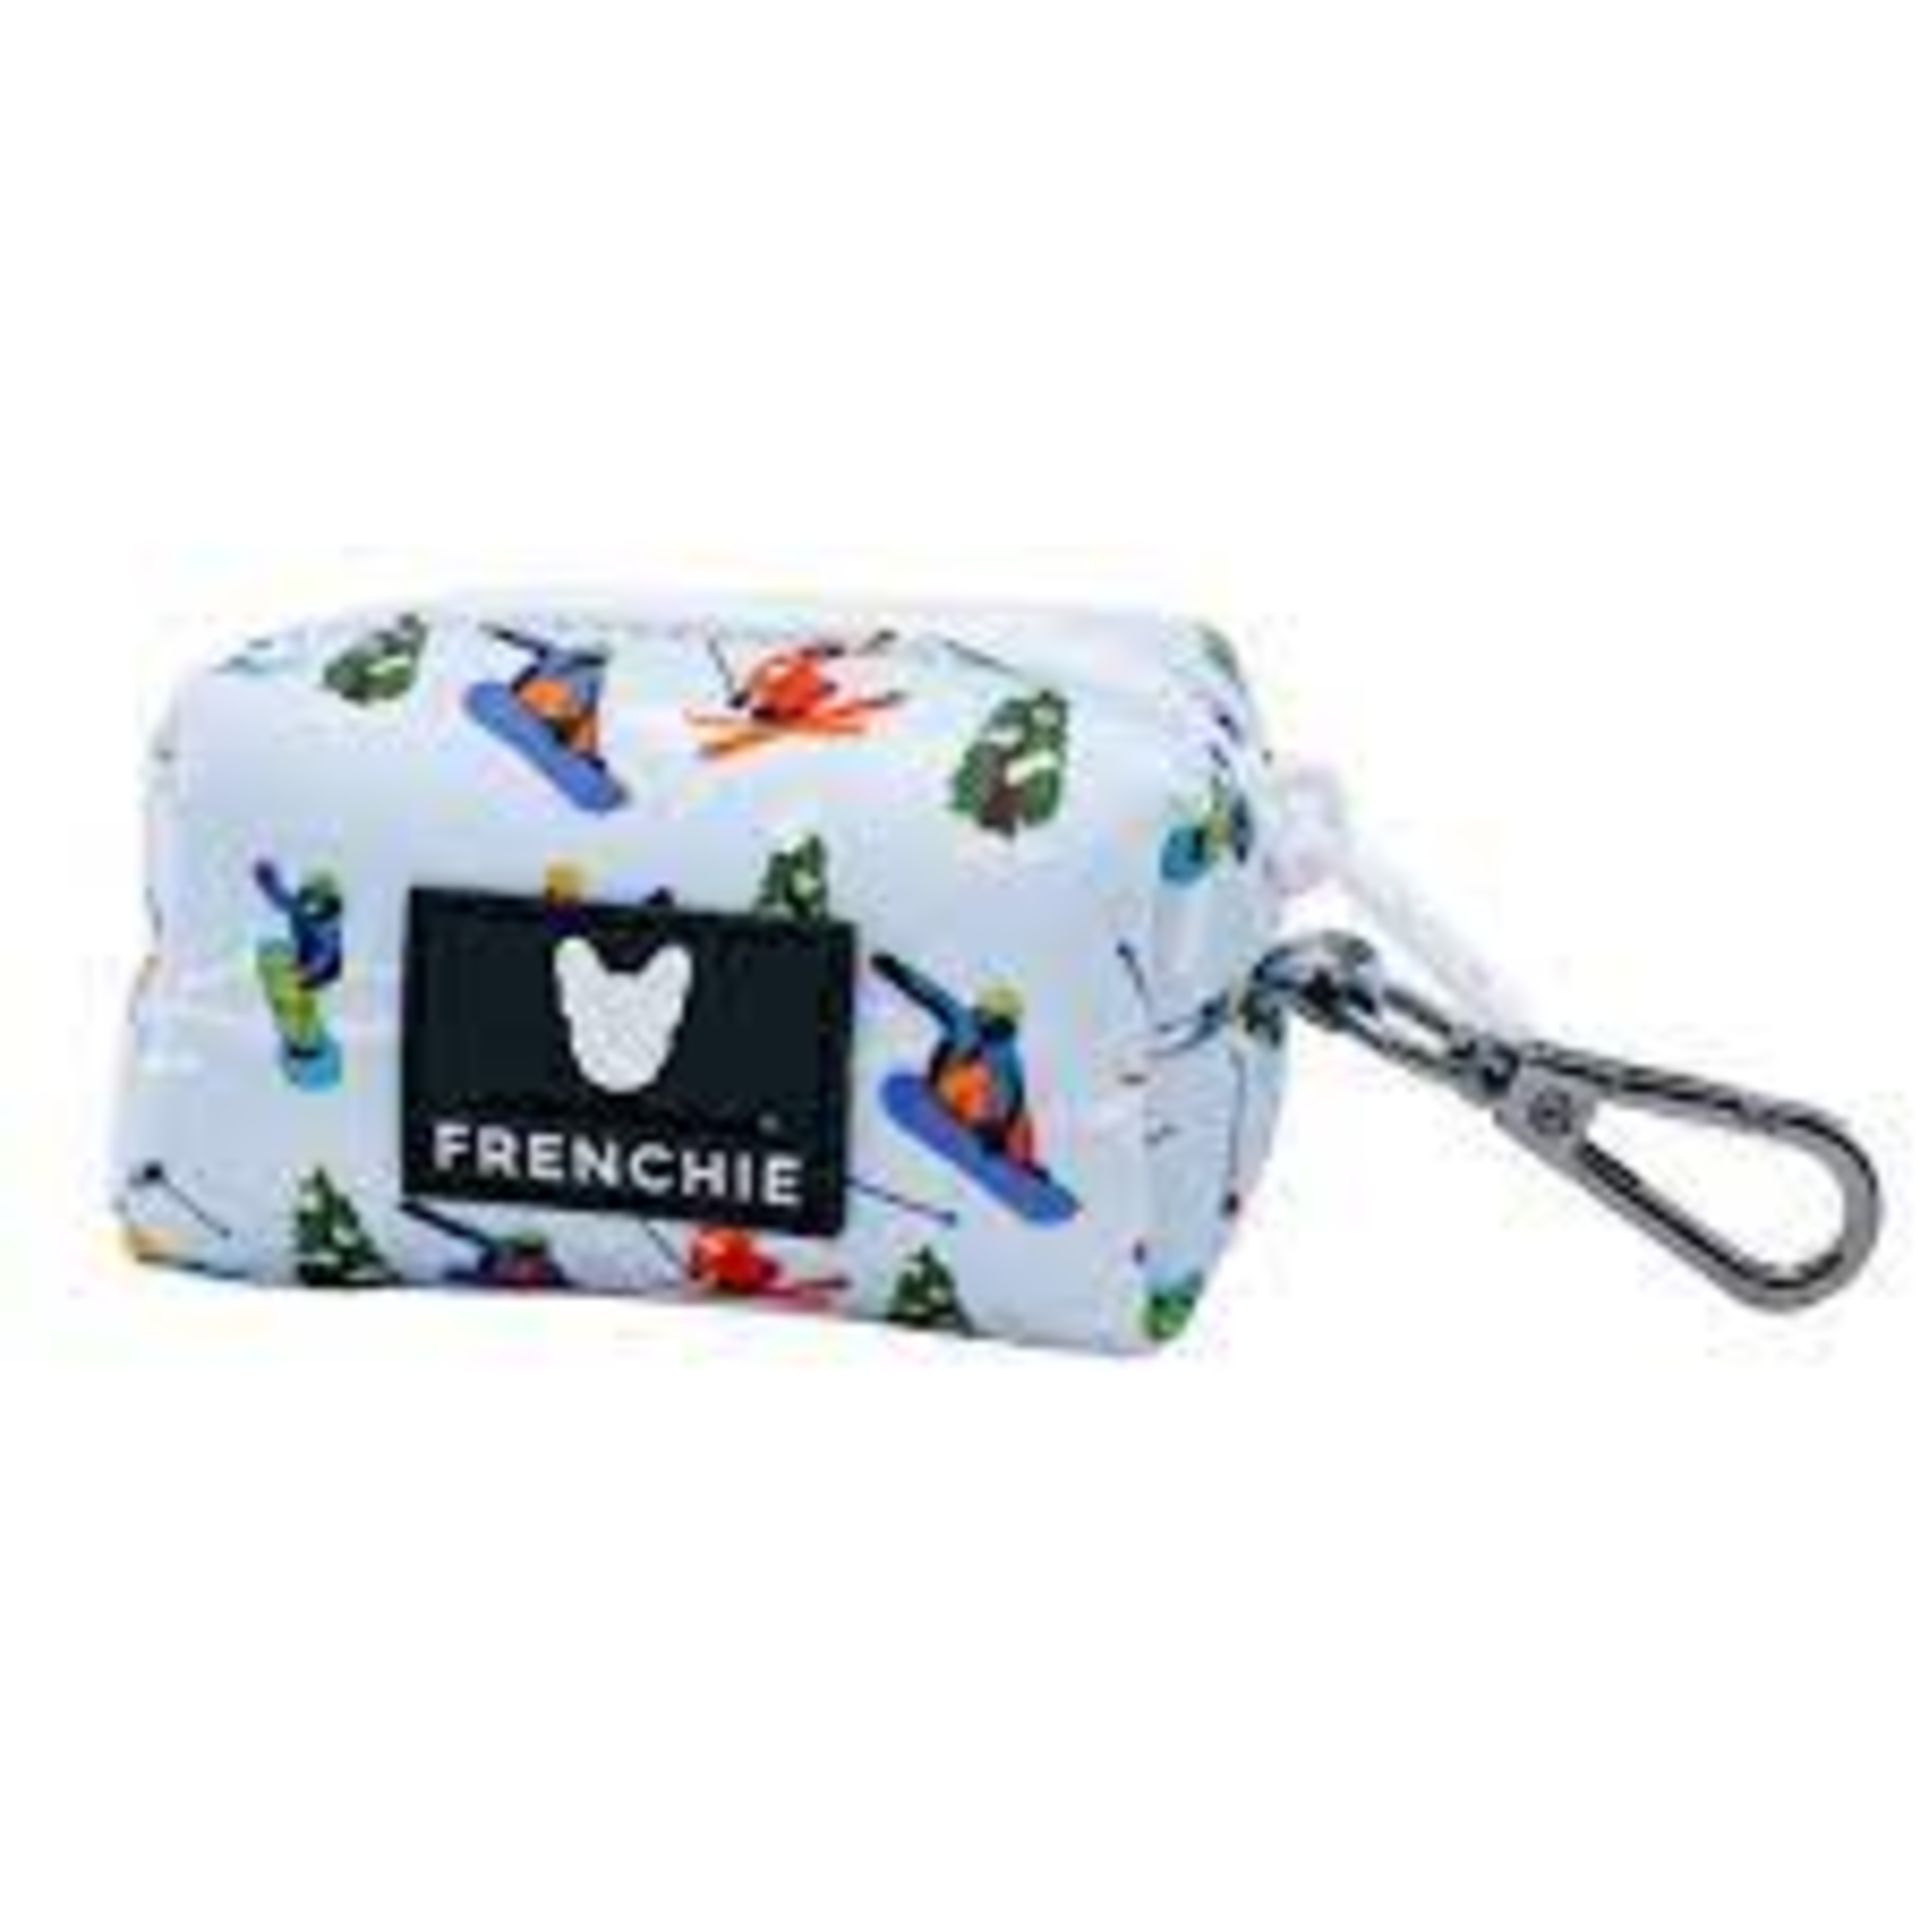 Bulk Trade Lot 500 X New .Packaged Frenchie The Bulldog Luxury Branded Dog Products. May include - Image 4 of 50